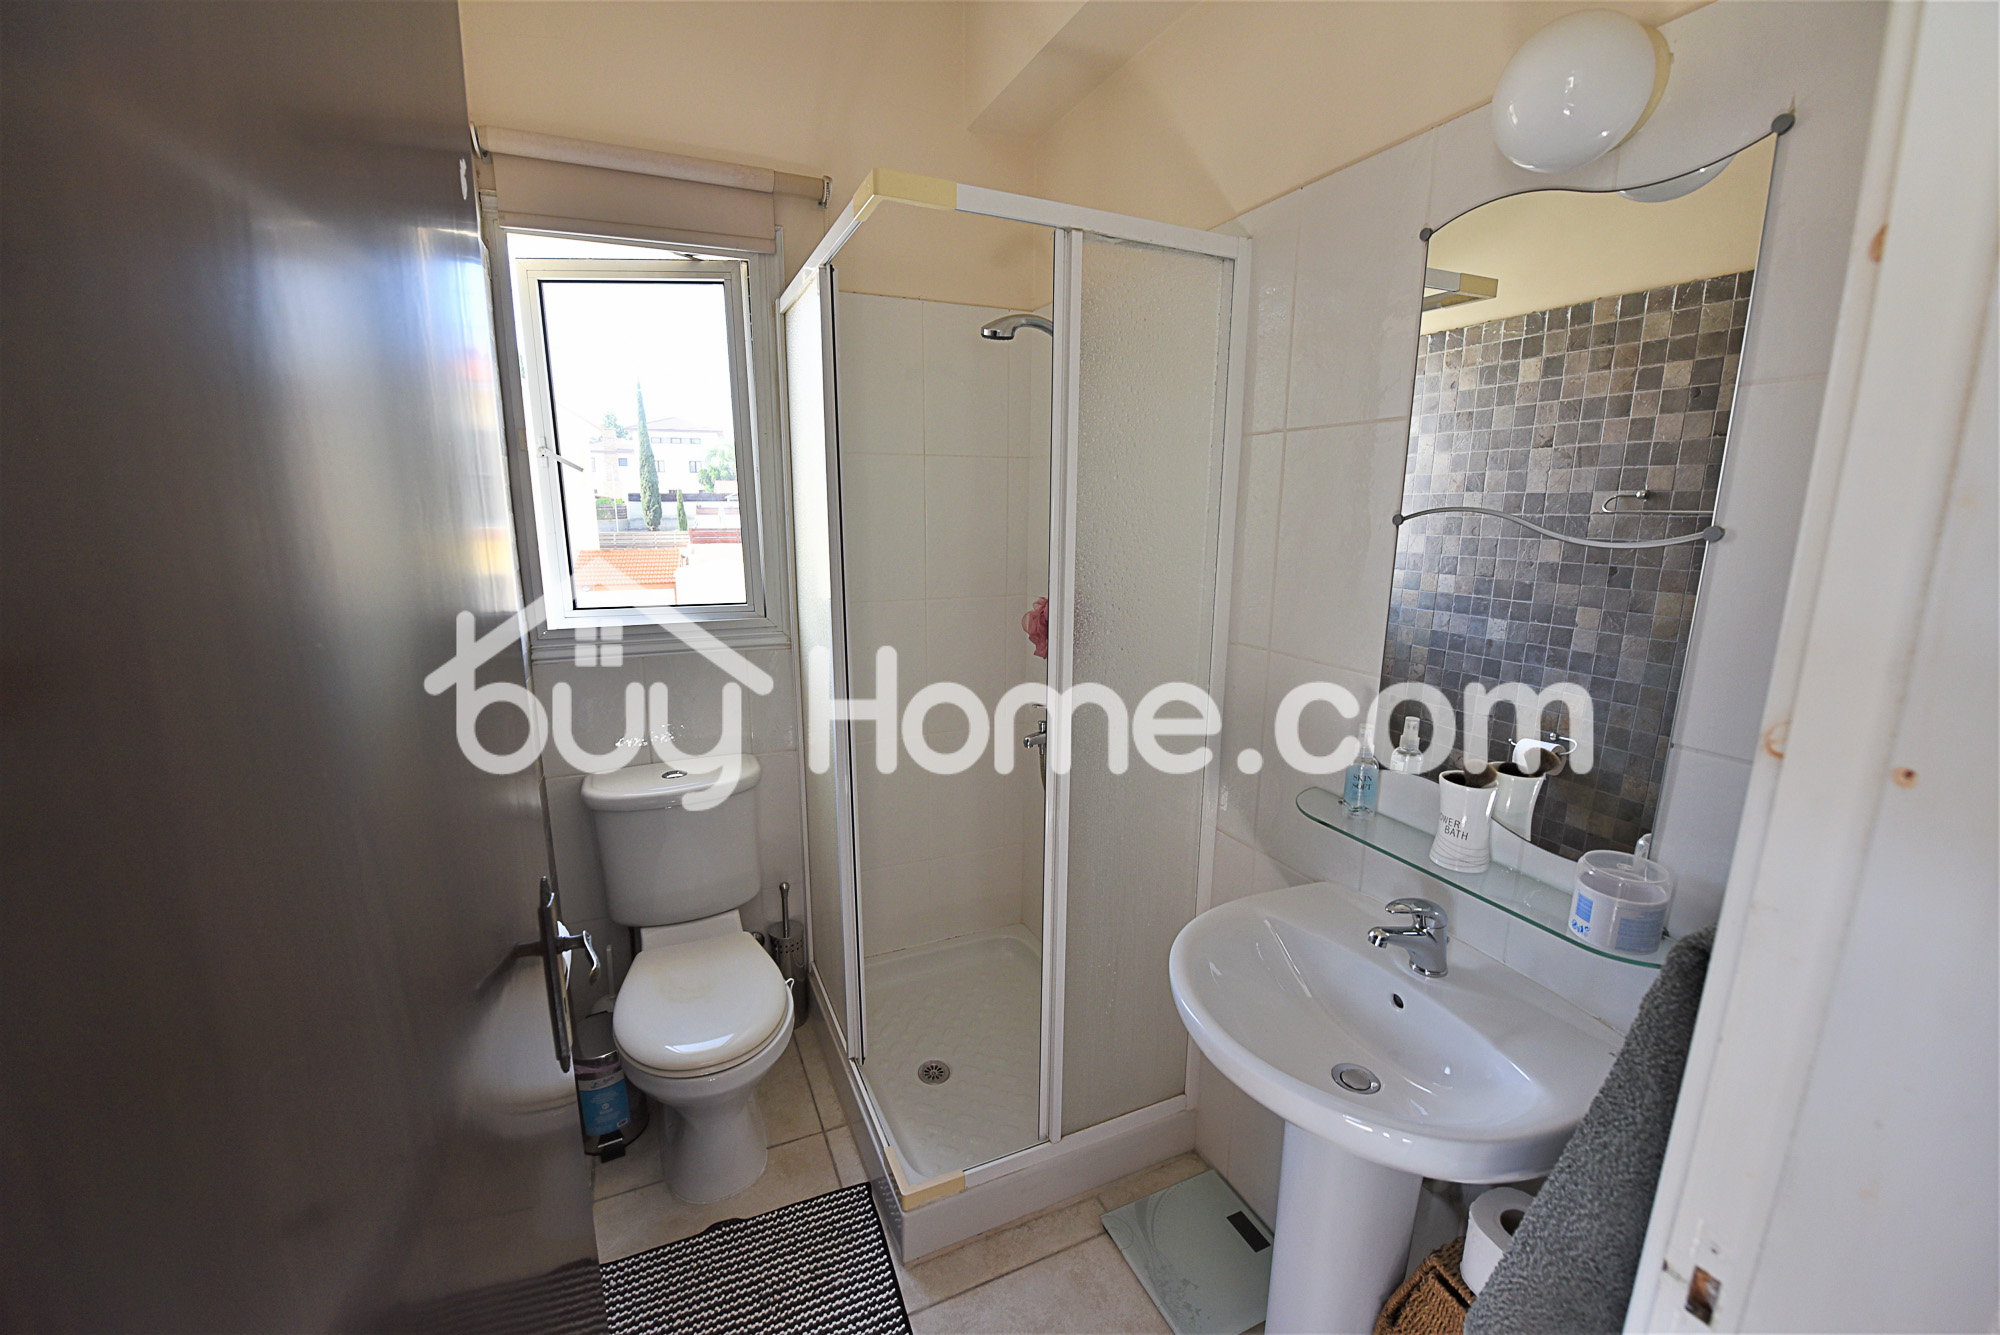 2 Bedroom House | BuyHome